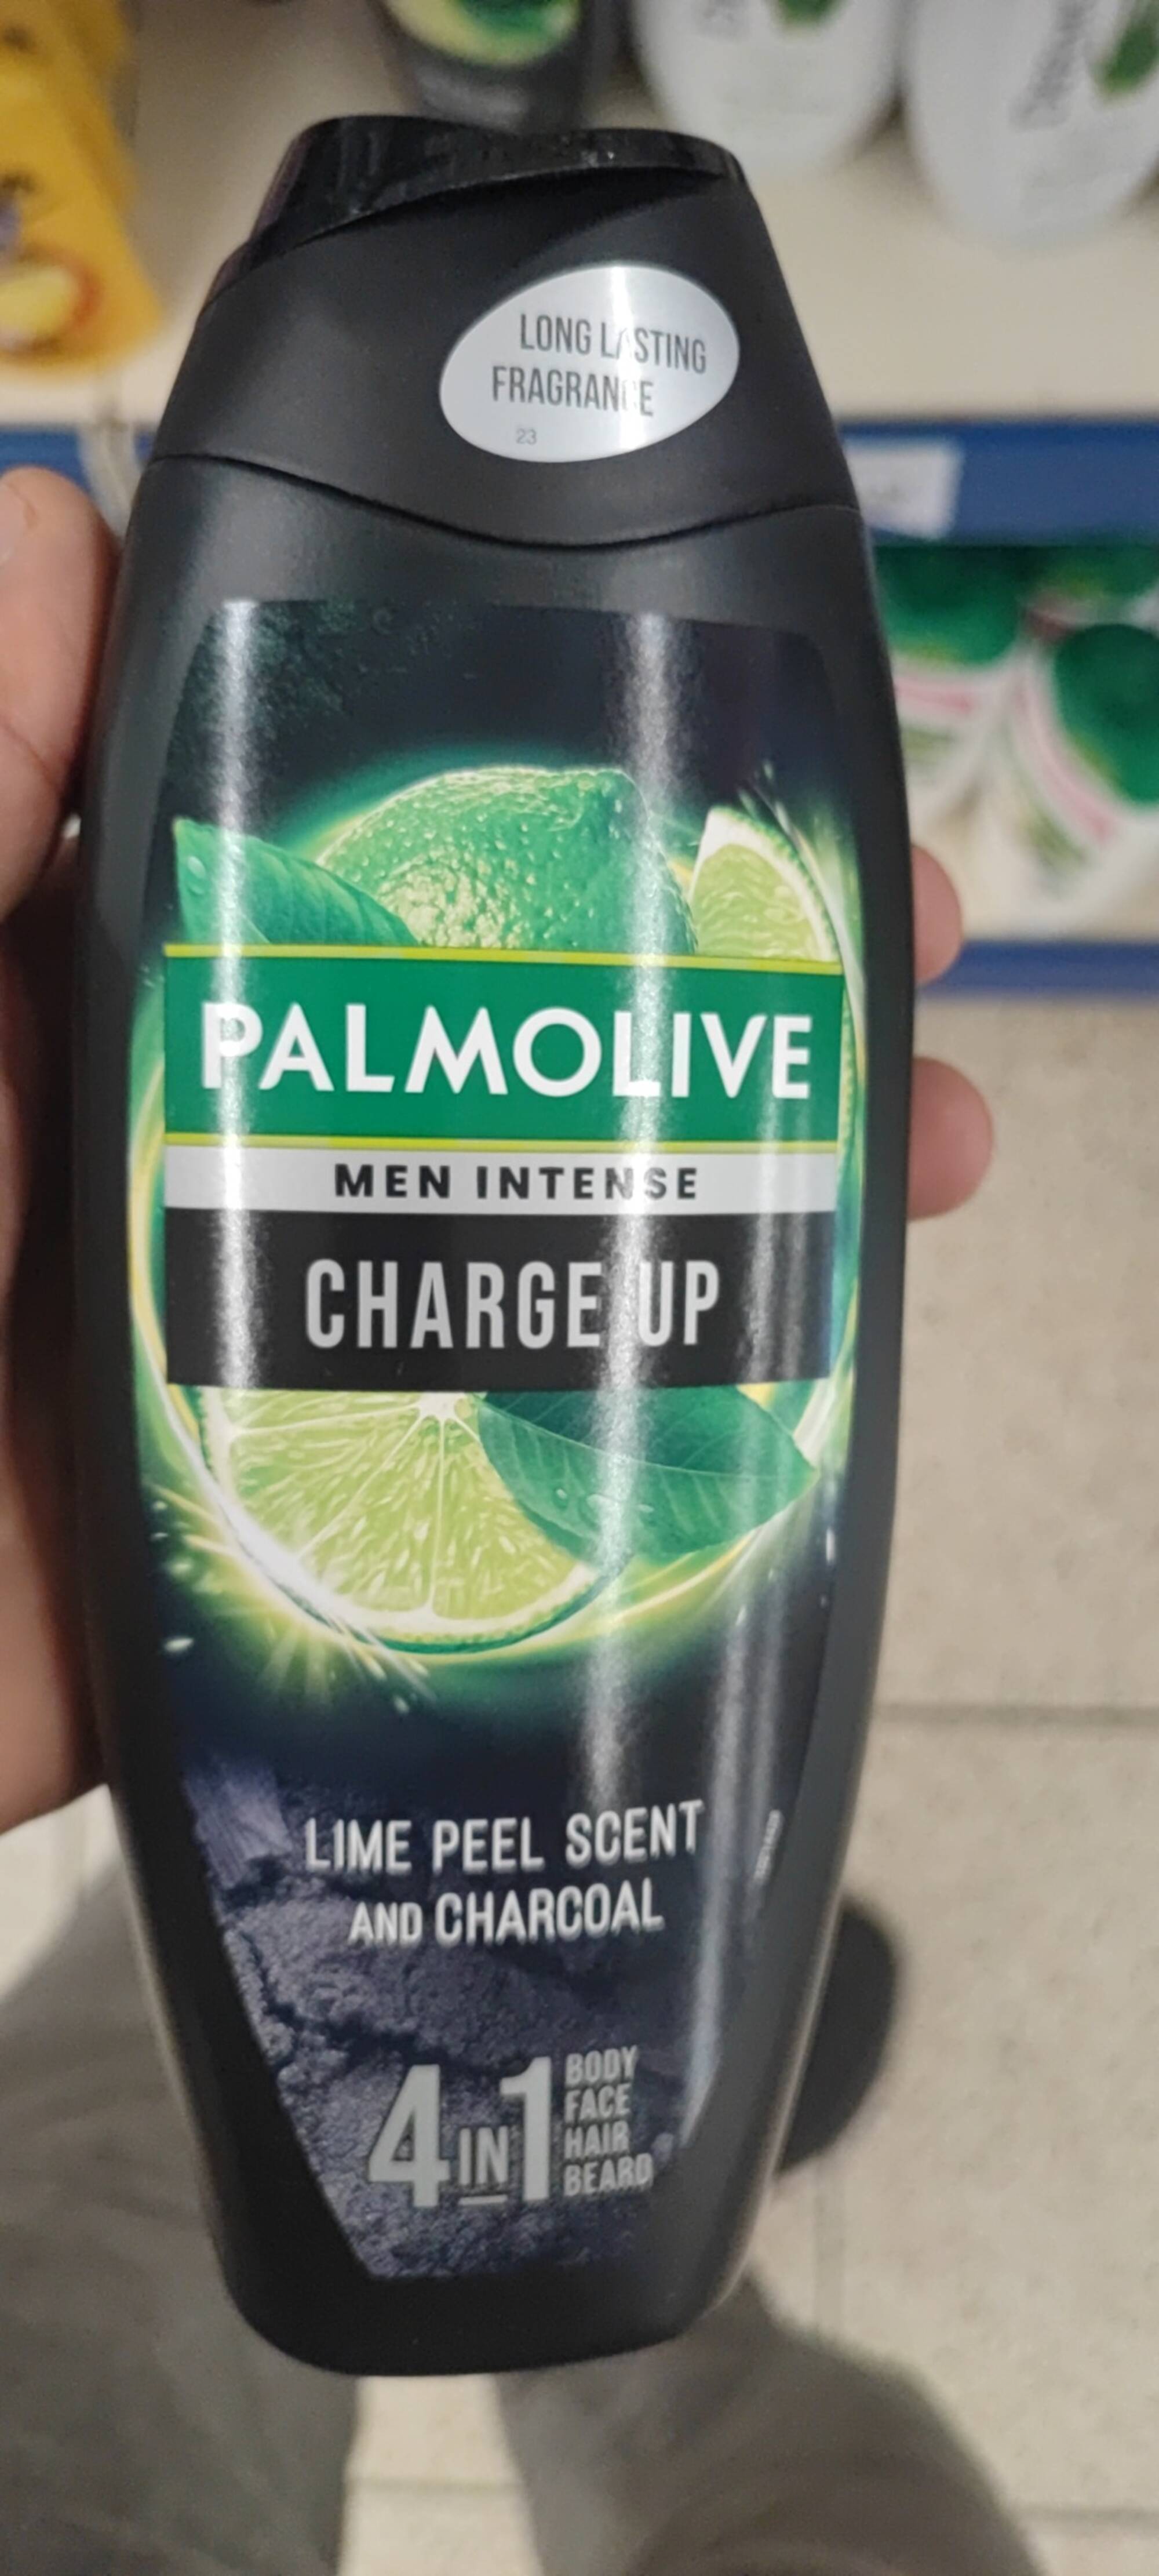 PALMOLIVE - Men intense charge up - Gel douche 4 in 1